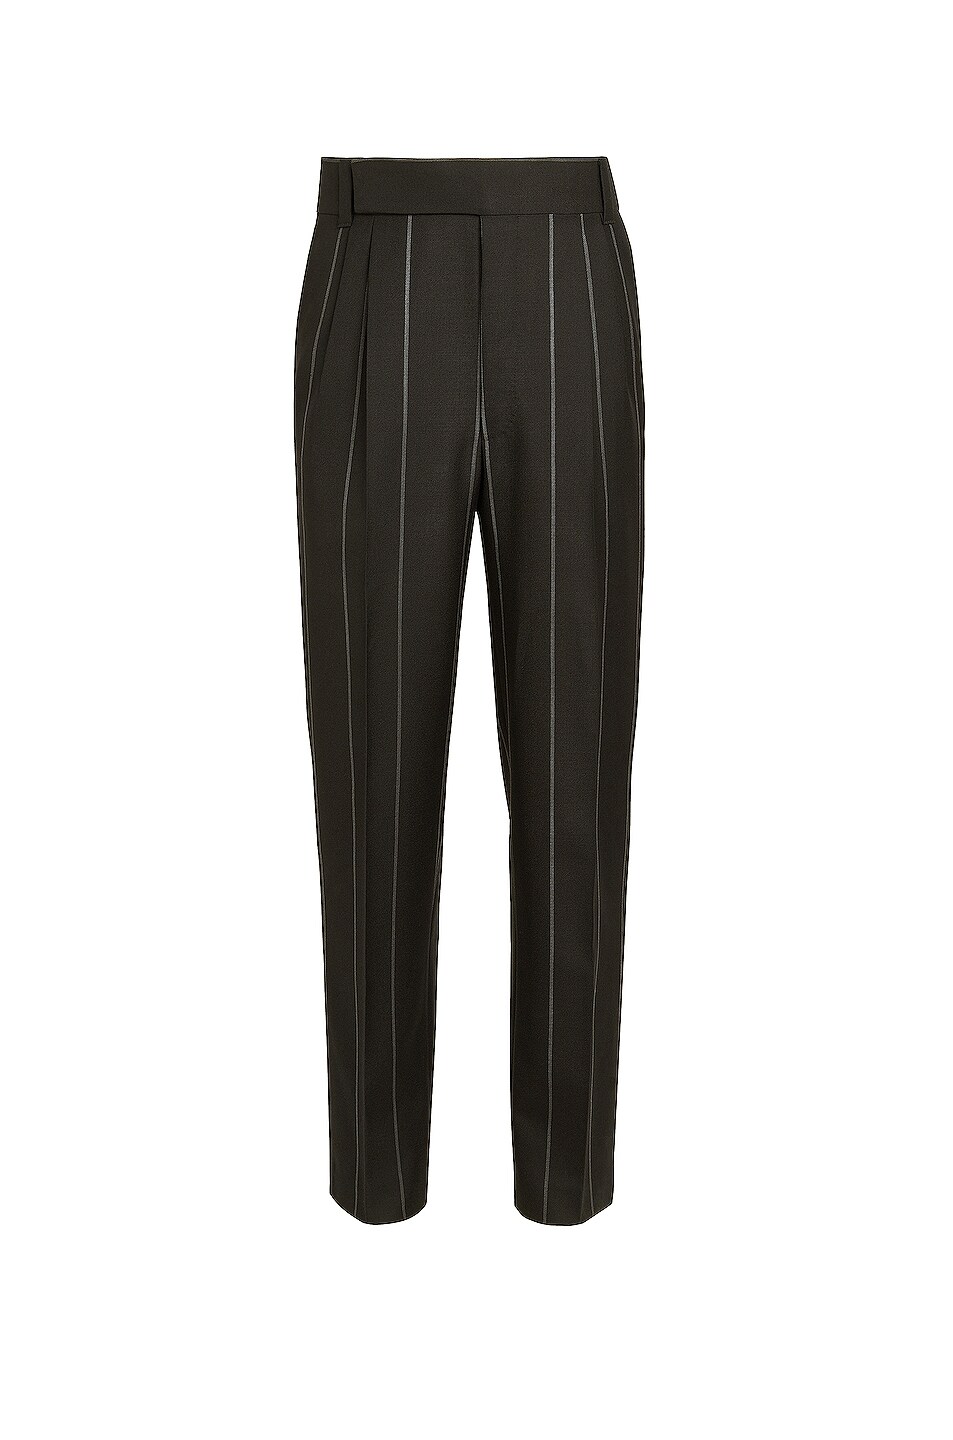 Image 1 of Fear of God Exclusively for Ermenegildo Zegna Double Pleat Trousers in Matte Black Anthracite